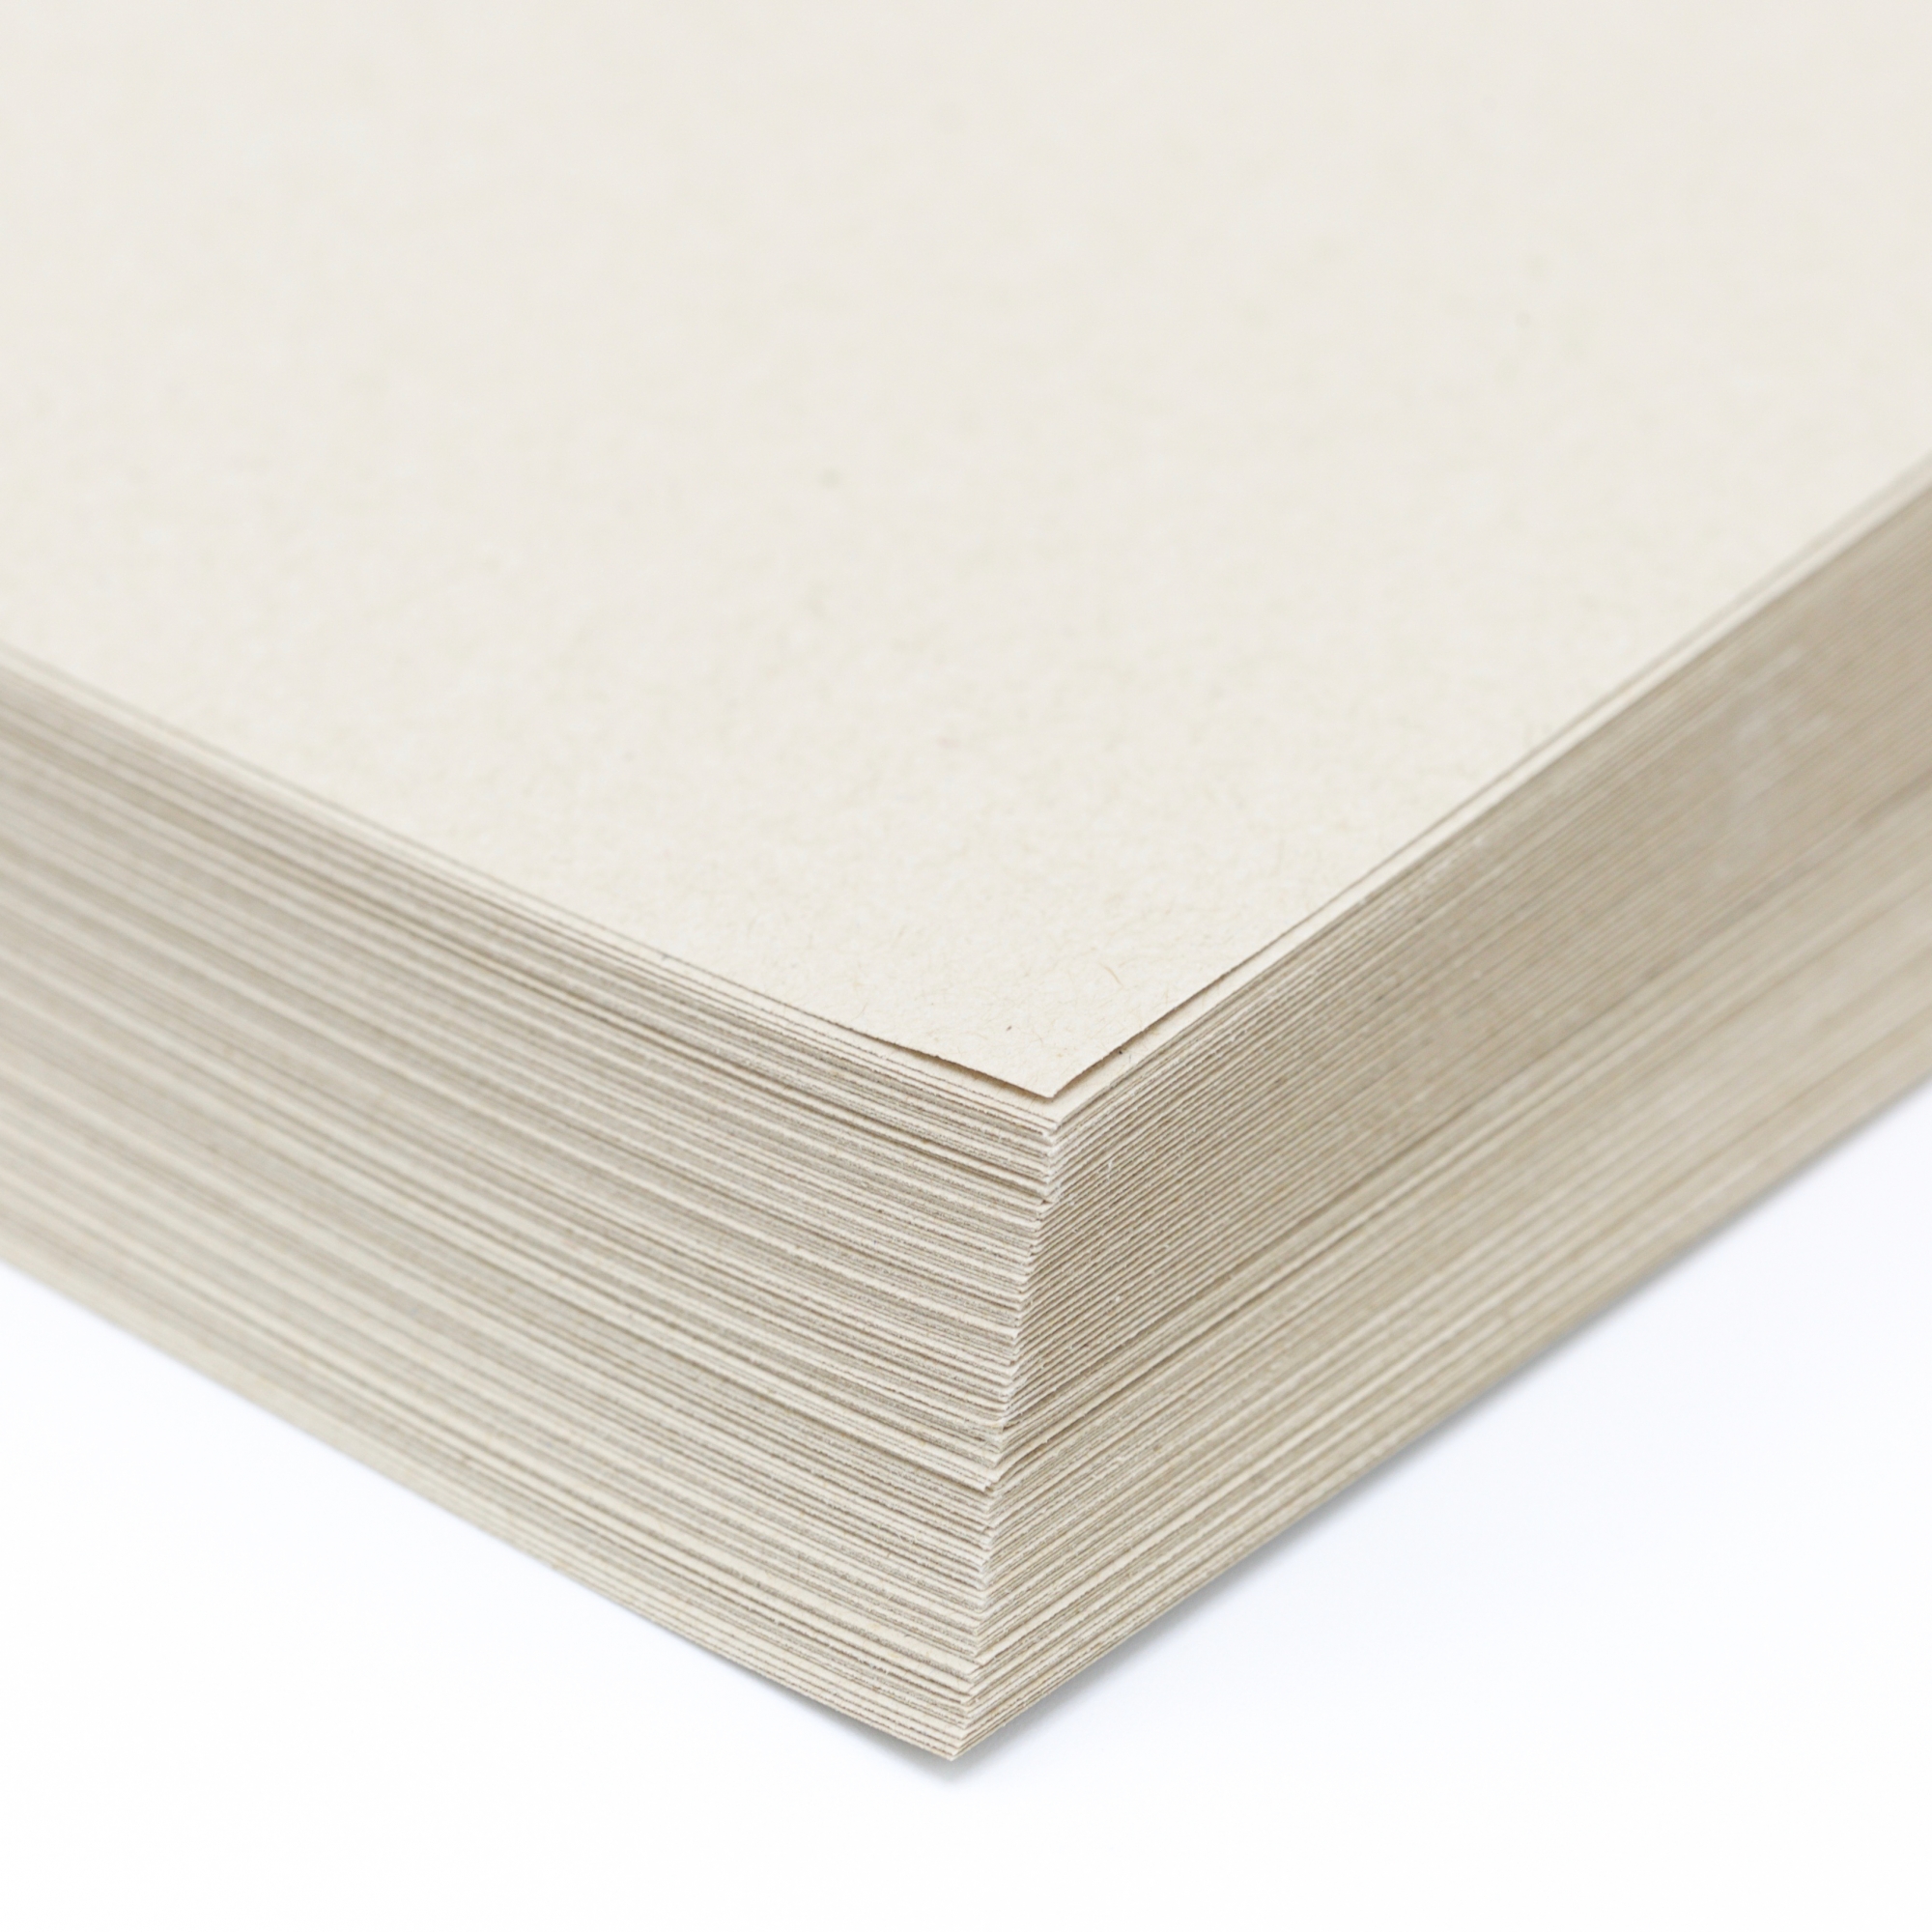 Soft Pink Card Stock - 26 x 40 in 80 lb Cover Vellum